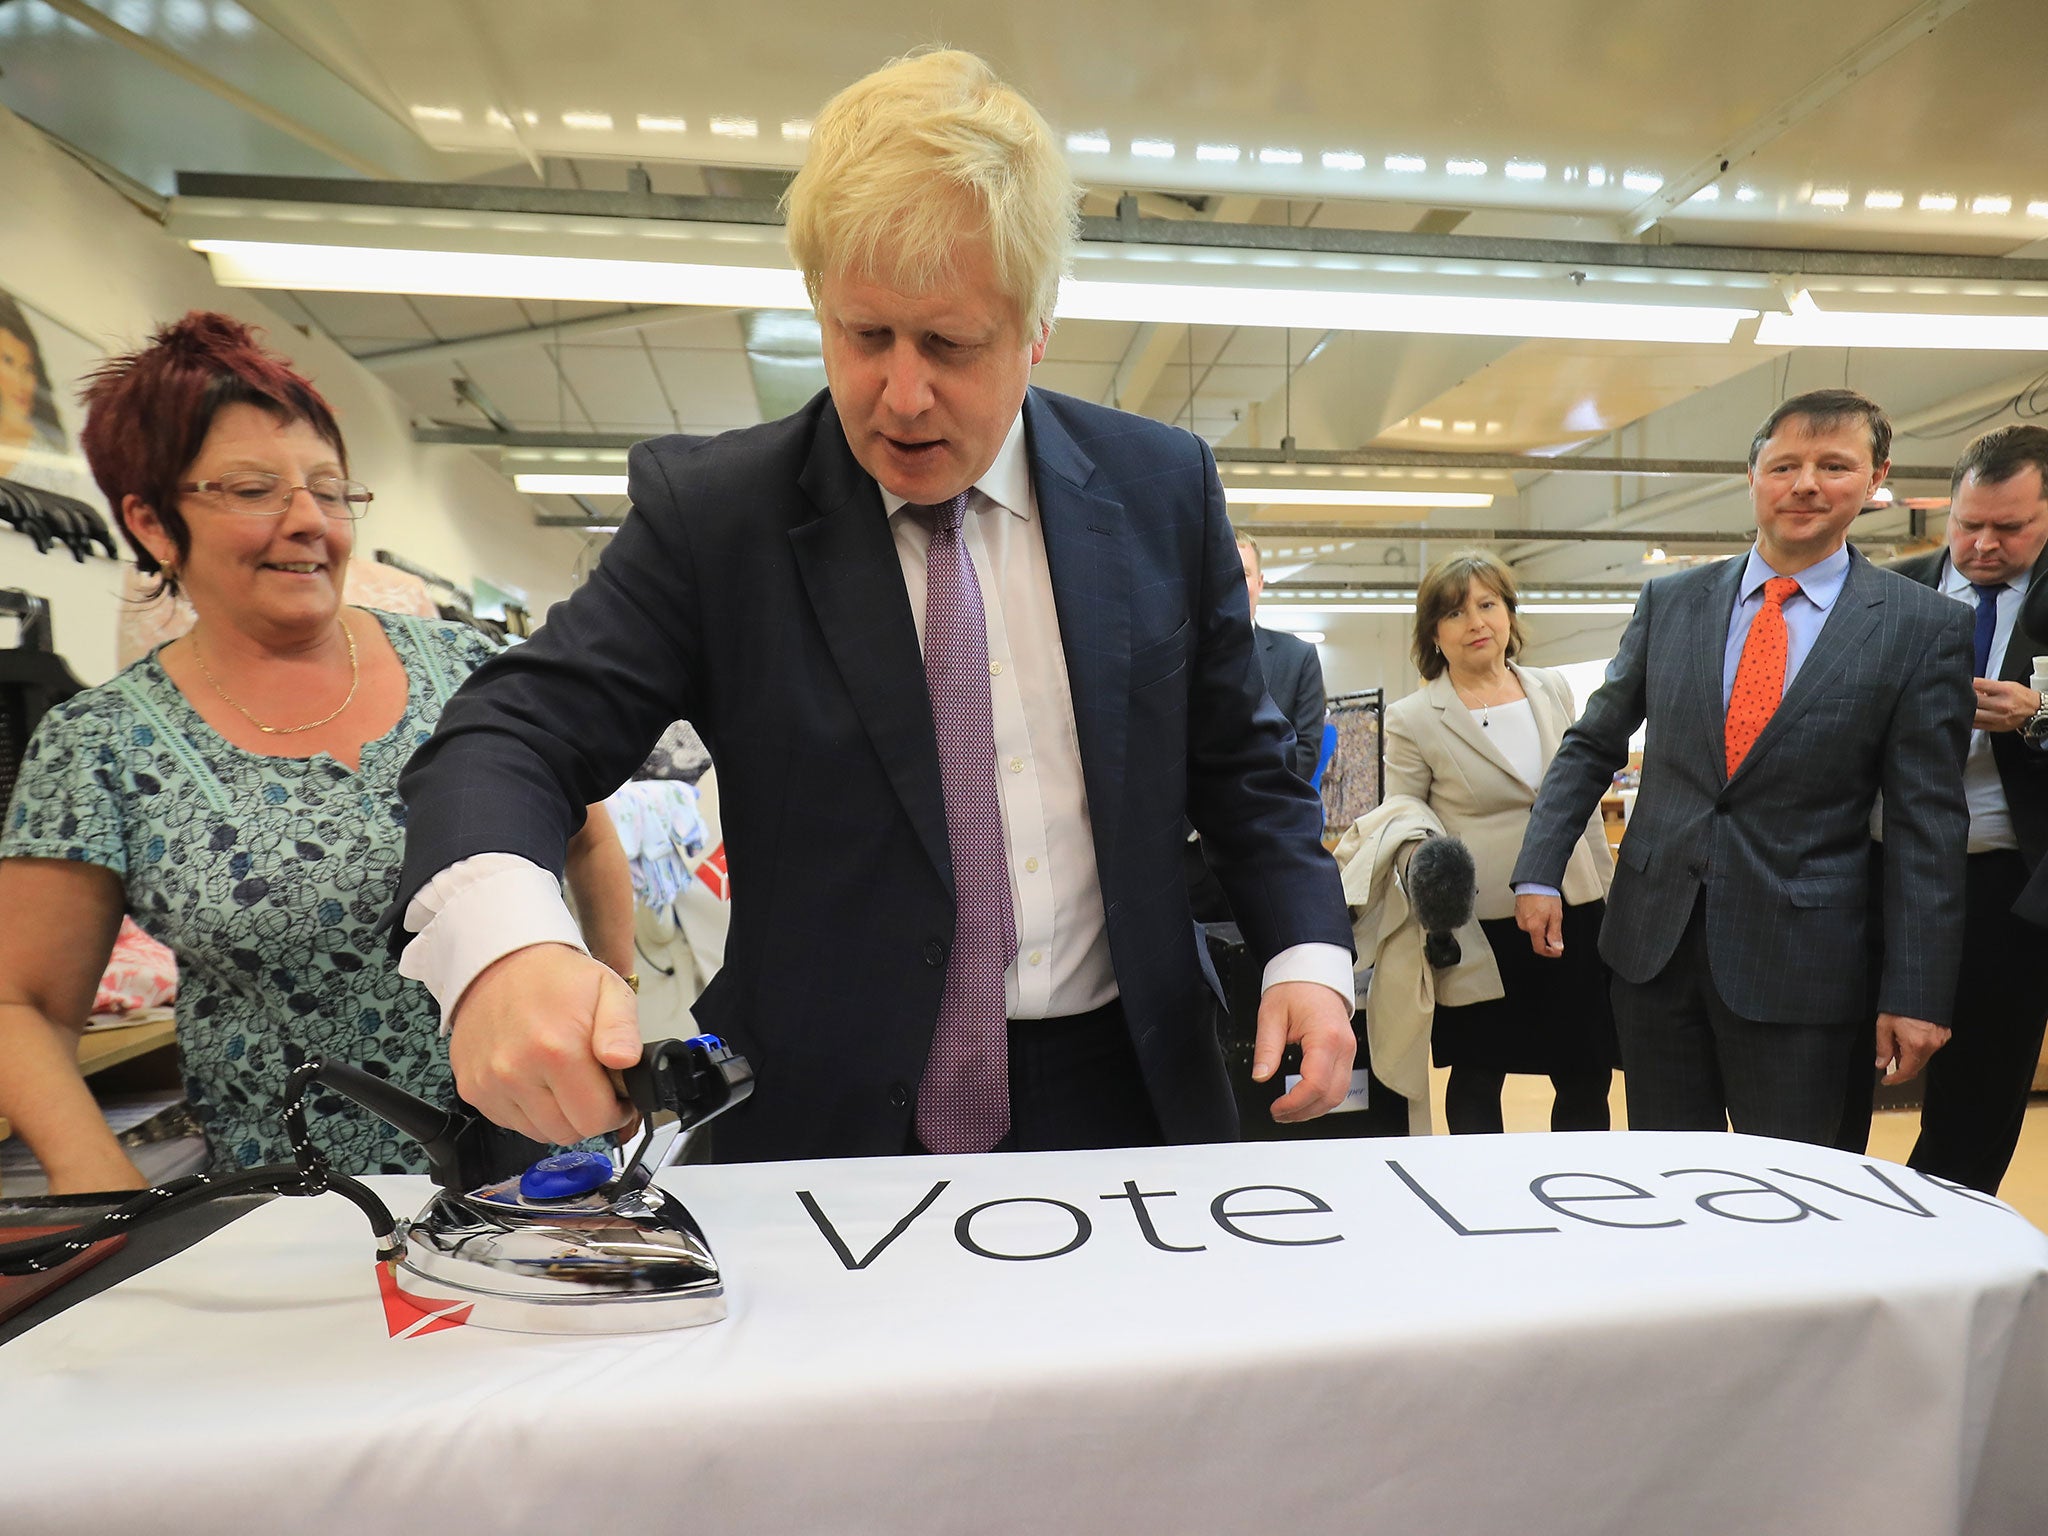 Boris Johnson making a visit yesterday to David Nieper Ltd, a manufacturer of luxury women's clothing and nightwear, as part of the Vote Leave tour